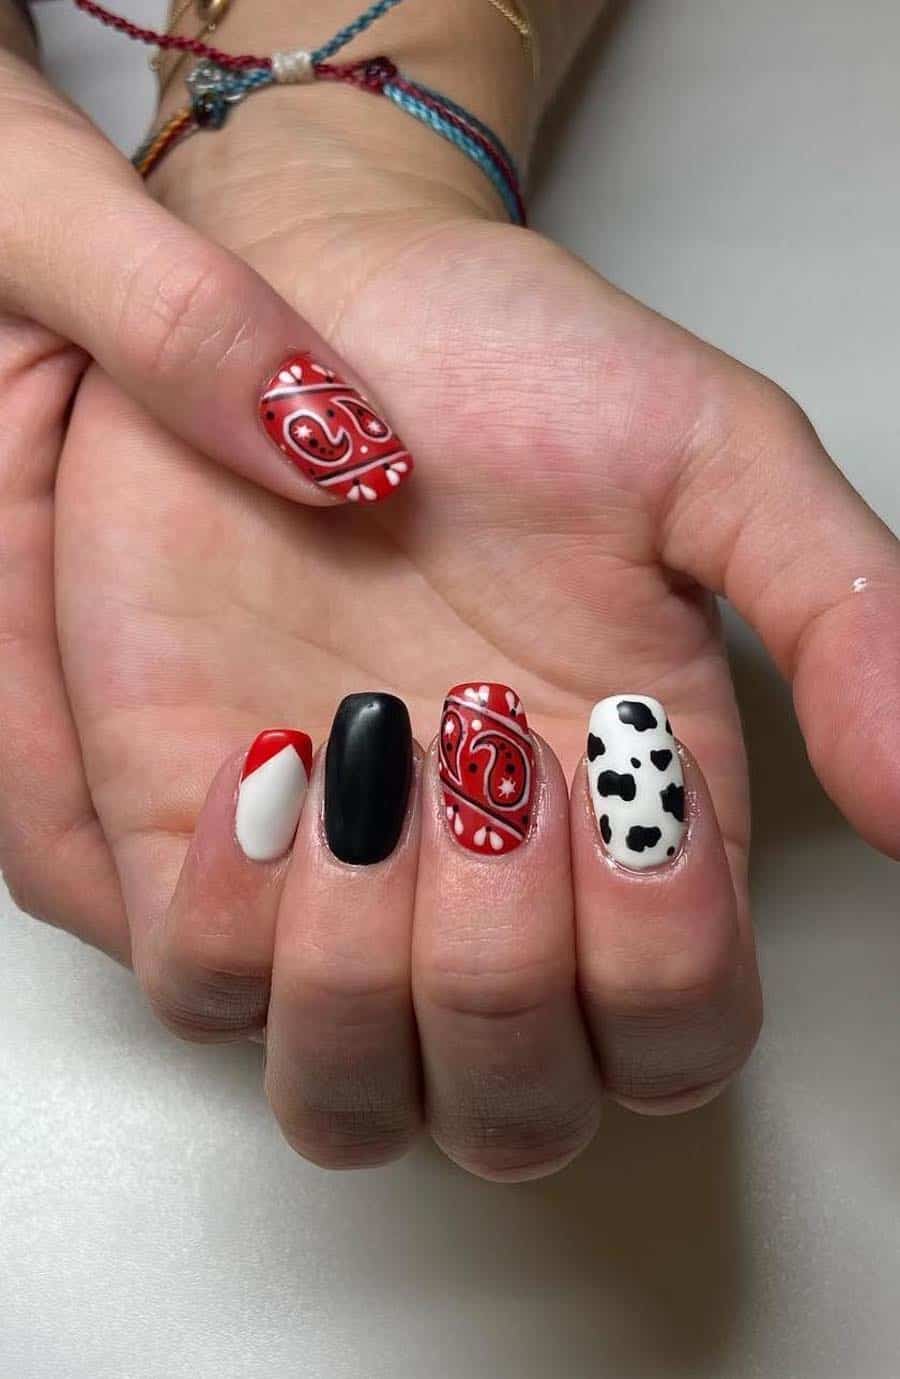 Short squoval nails featuring red, white, and black designs like paisley and cow print